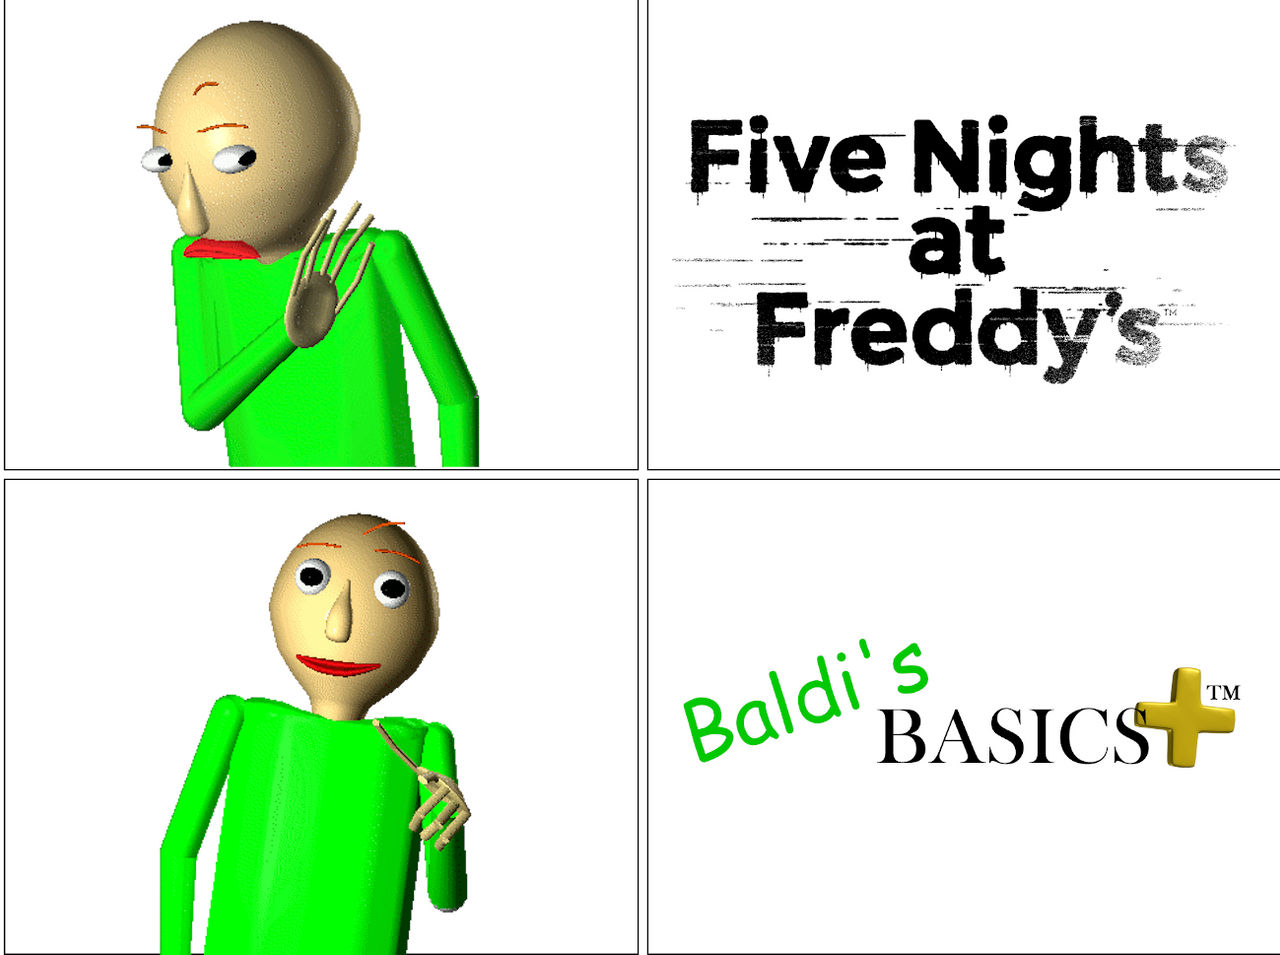 Welcome To Baldis Basics In Education And Learning by baldi777 on DeviantArt